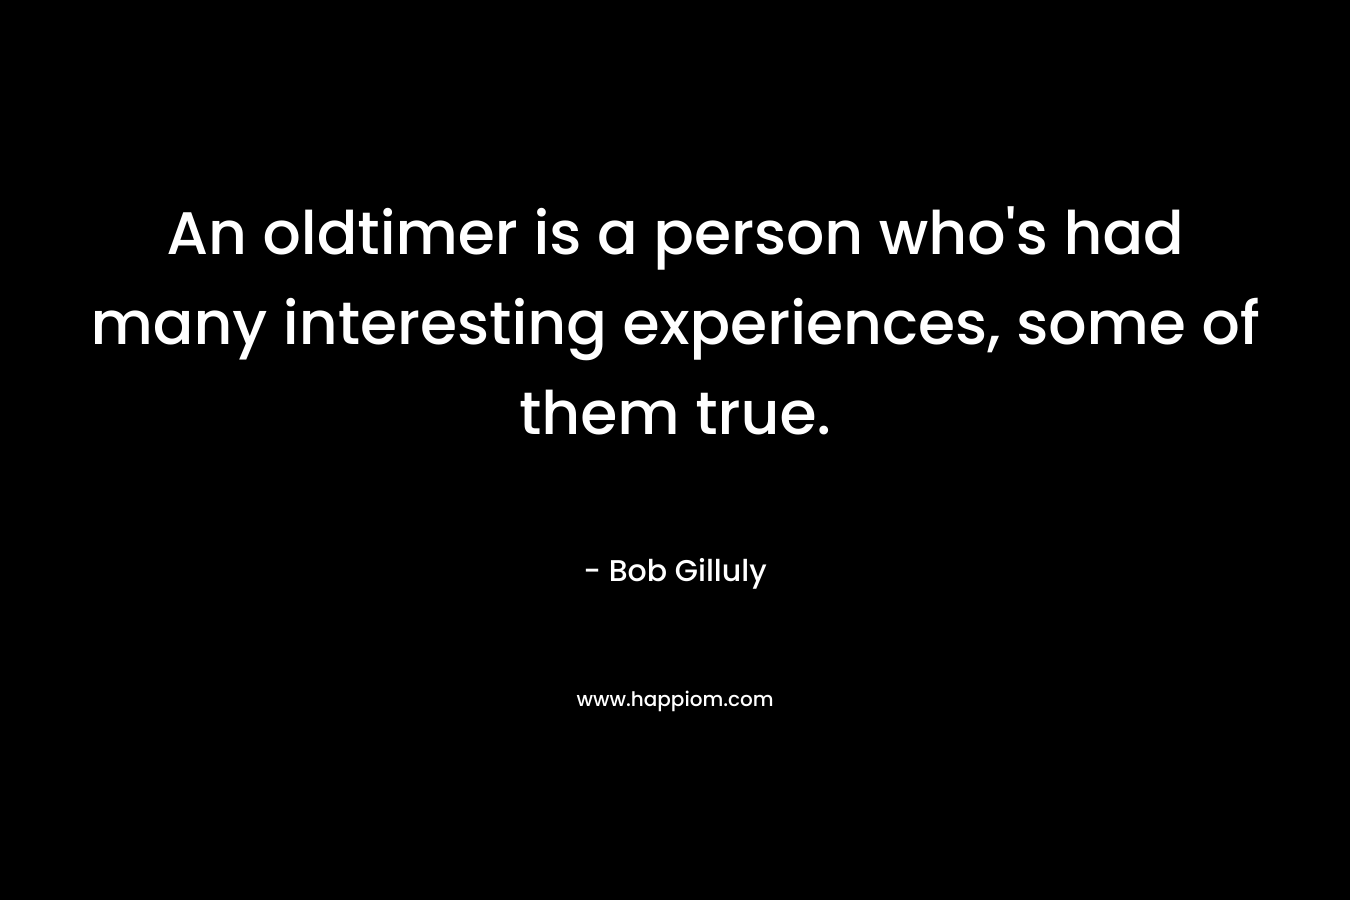 An oldtimer is a person who’s had many interesting experiences, some of them true. – Bob Gilluly